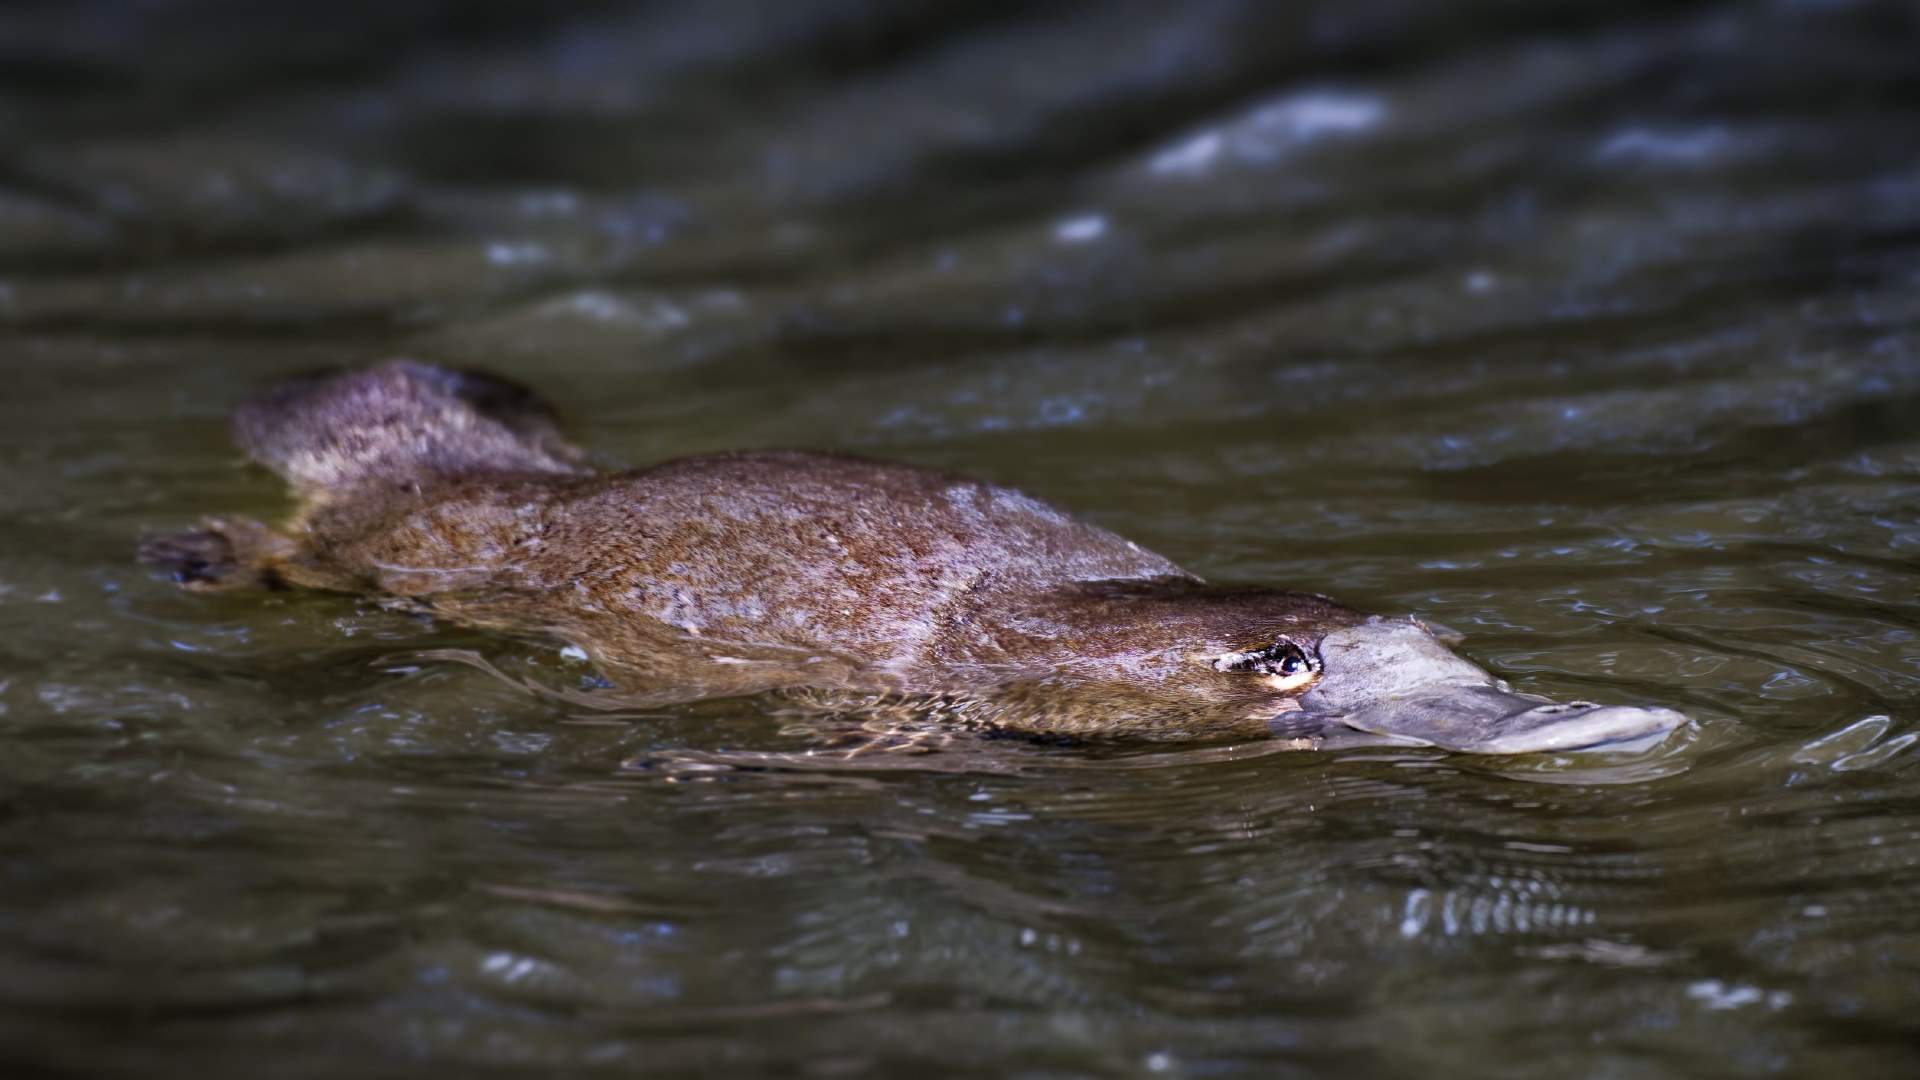 Six Months After Being Reintroduced to the Royal National Park, Platypuses Are Loving Their New Home